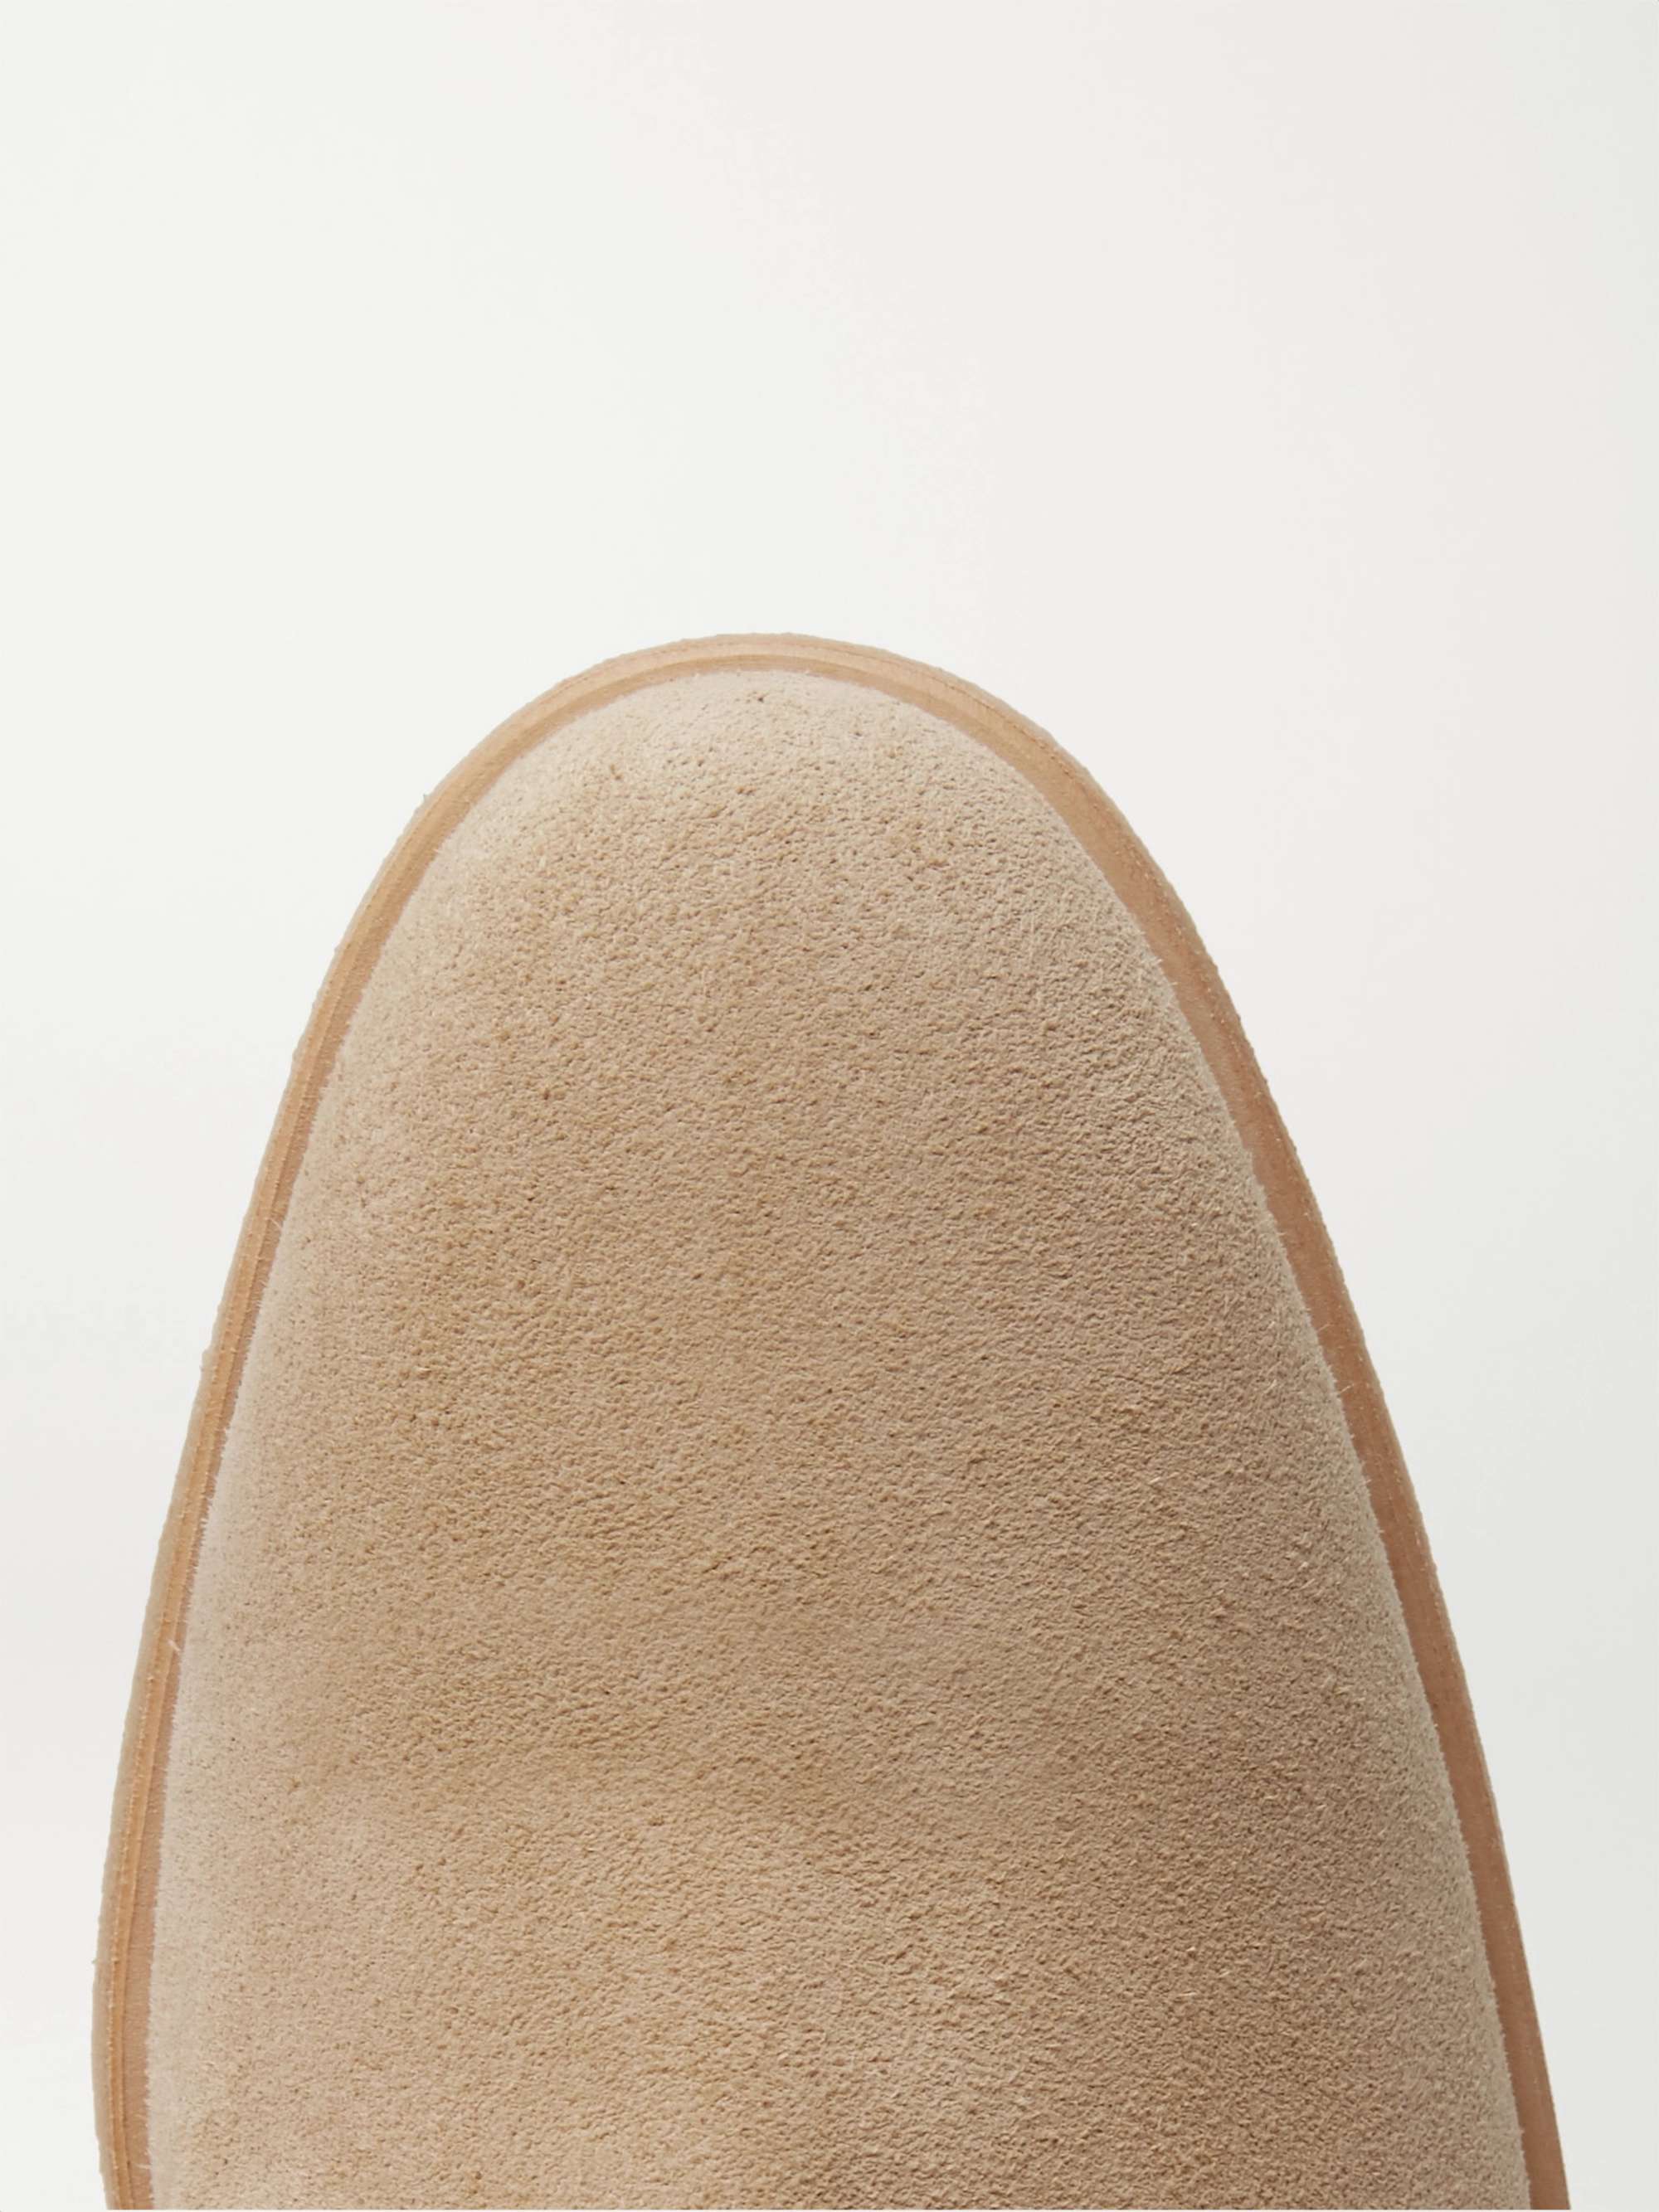 COMMON PROJECTS Suede Chelsea Boots